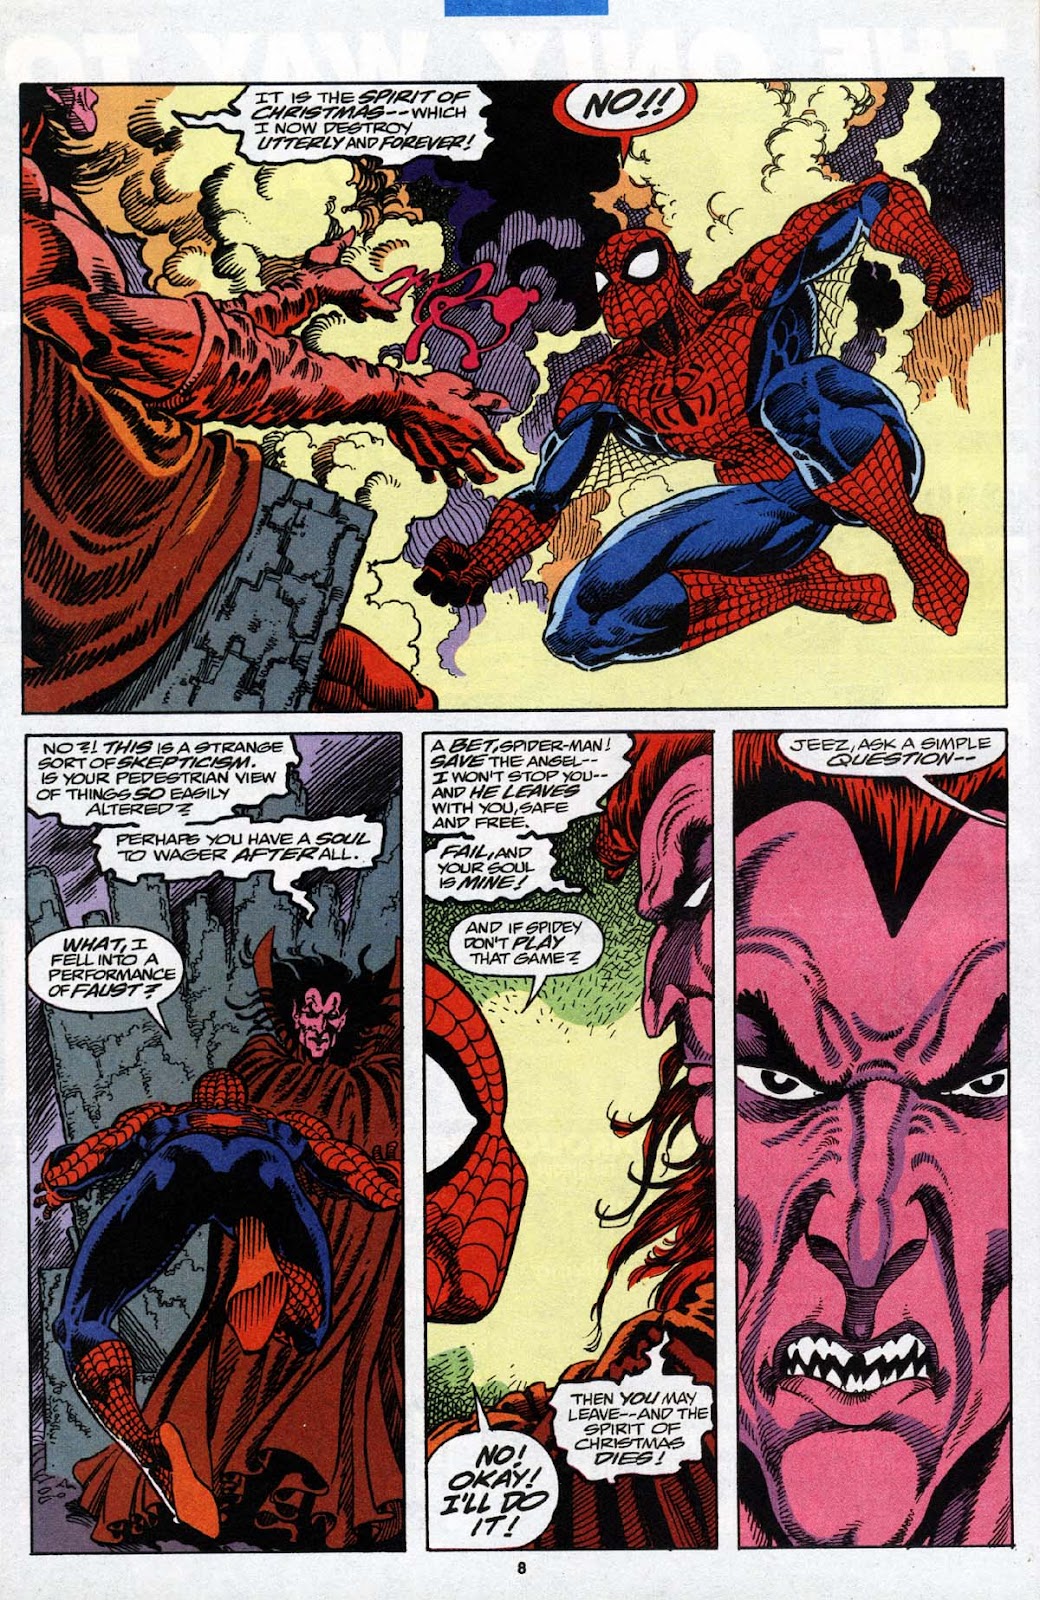 Marvel Holiday Special (1991) issue 1993 - Page 8